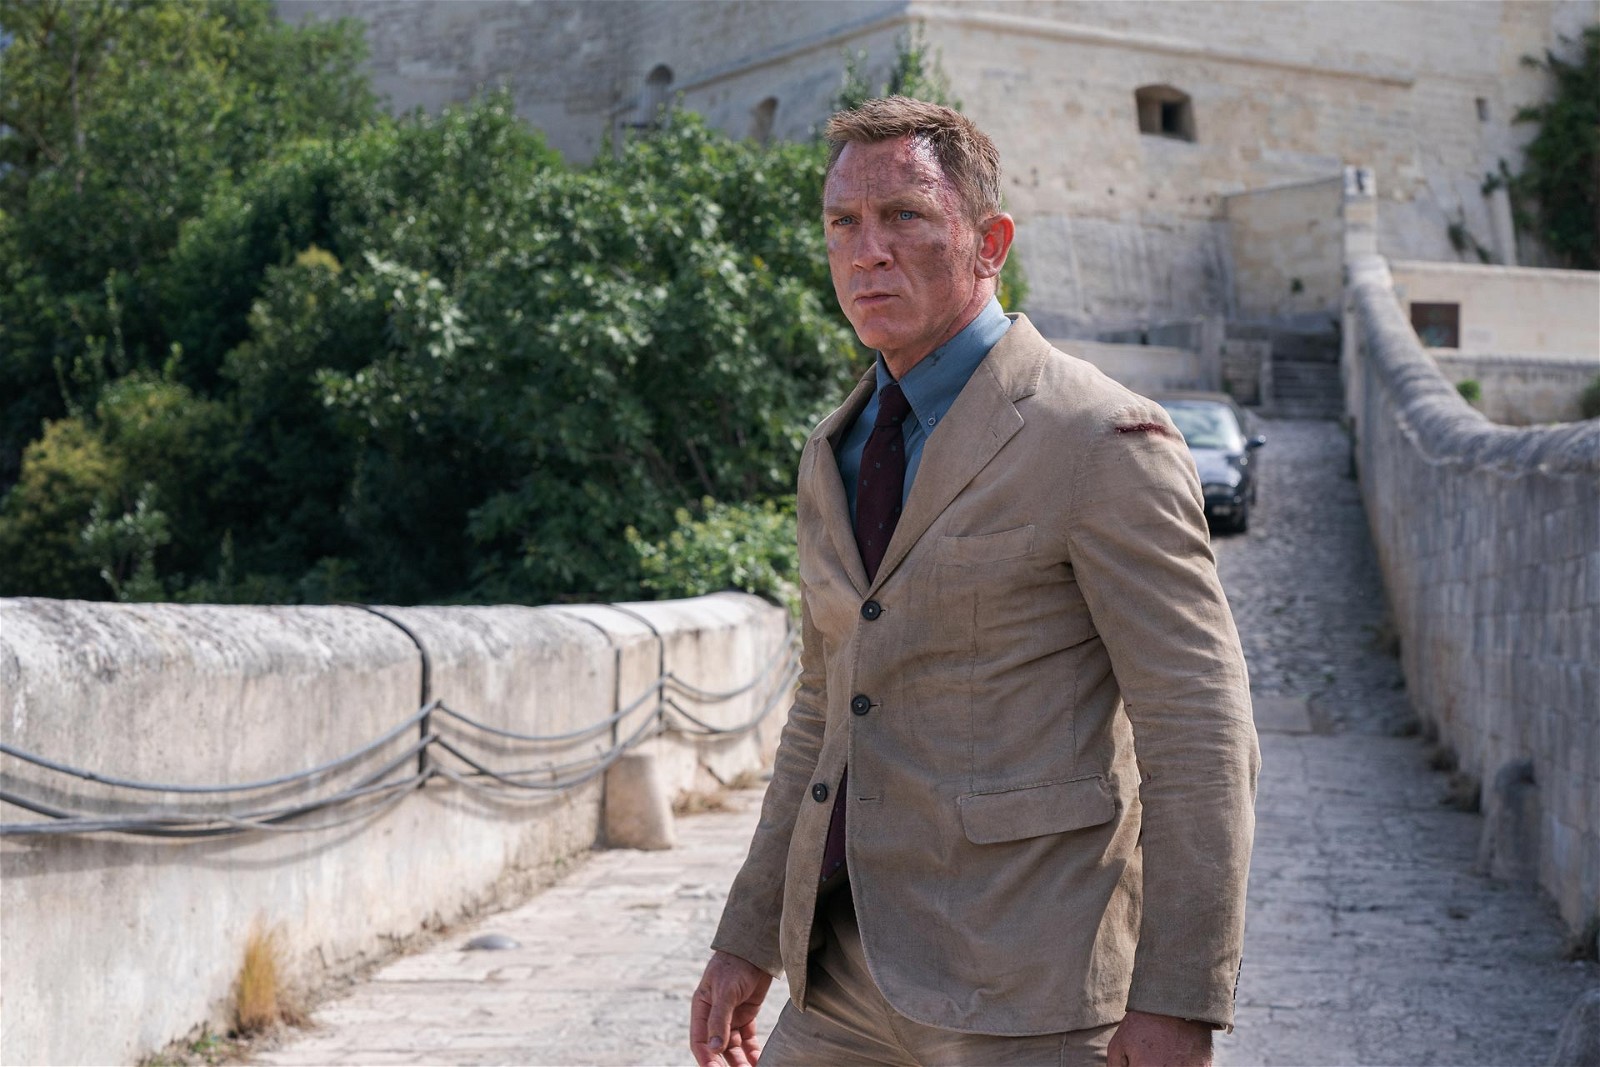 Daniel Craig as James Bond in a still from No Time To Die 